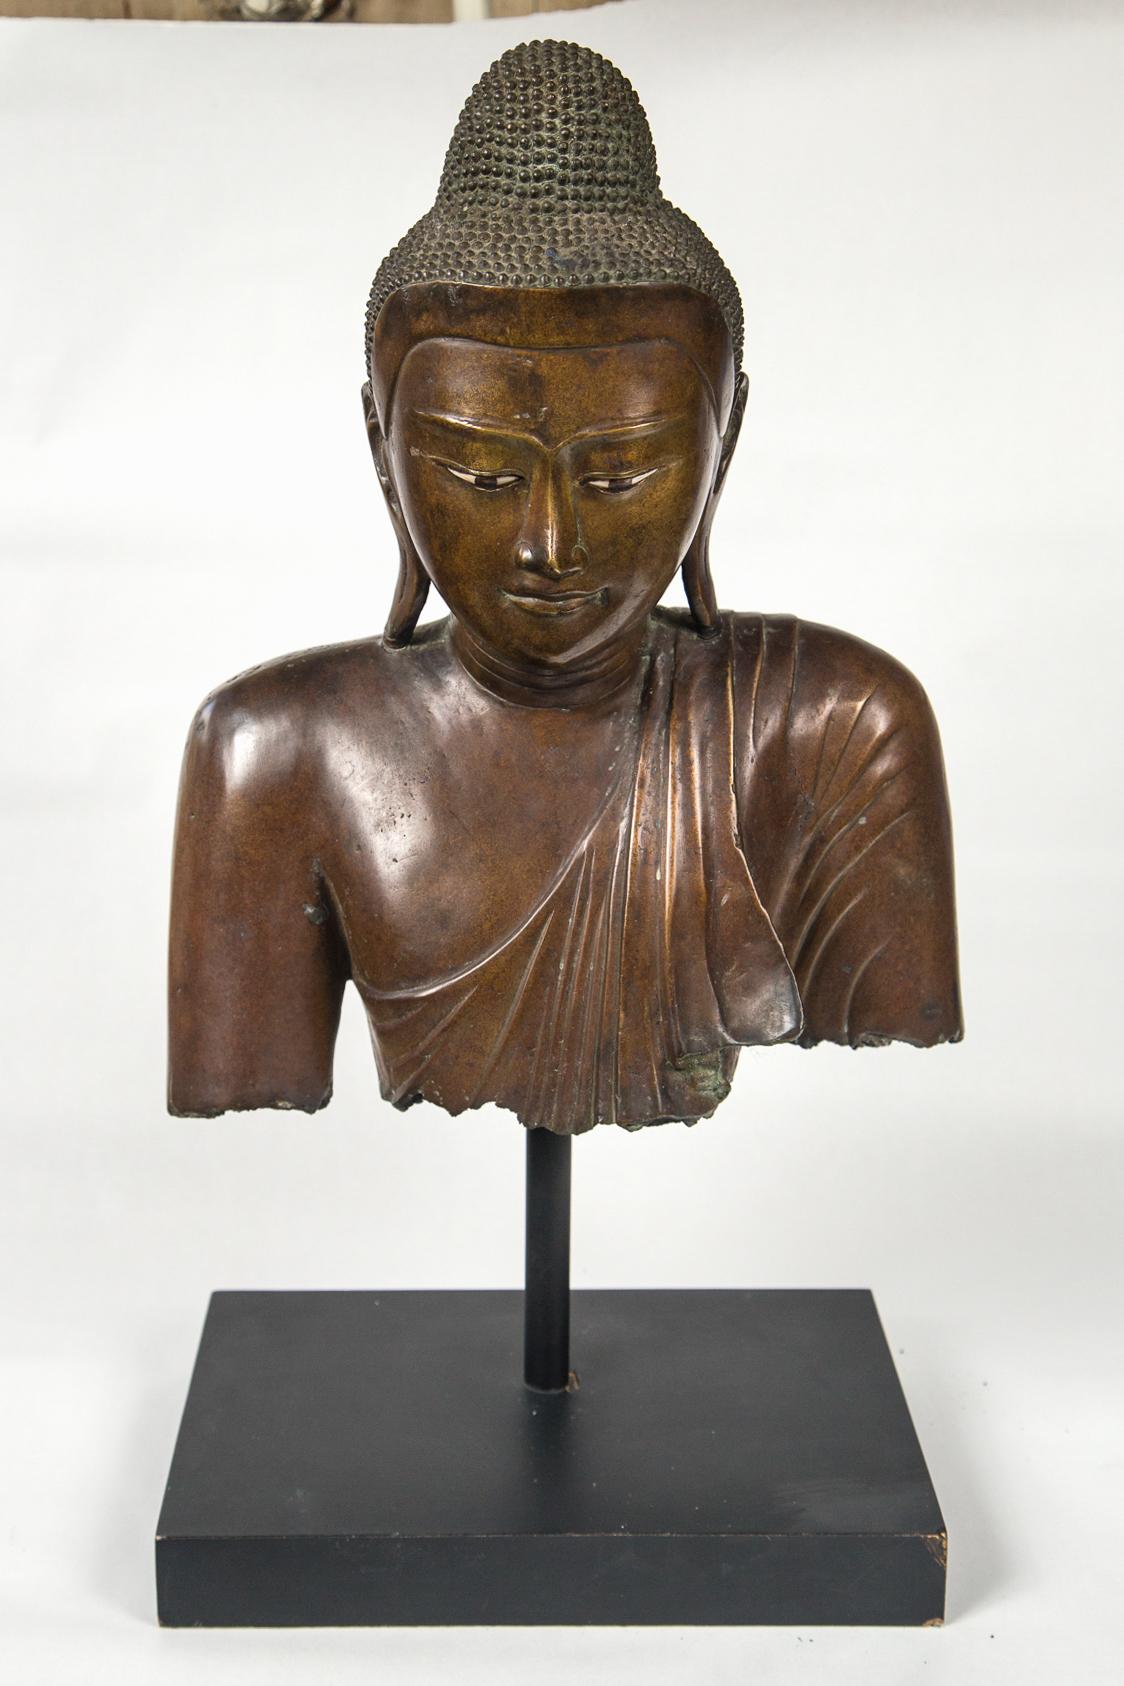 Fragment piece of the shoulders and head of this Buddha. Enameled eyes. Raised above a black base on a rod.
The overall dimensions in inches, are 23 tall, 11.75 wide and 14.5 deep
dimensions for the fragment itself are given below.
  